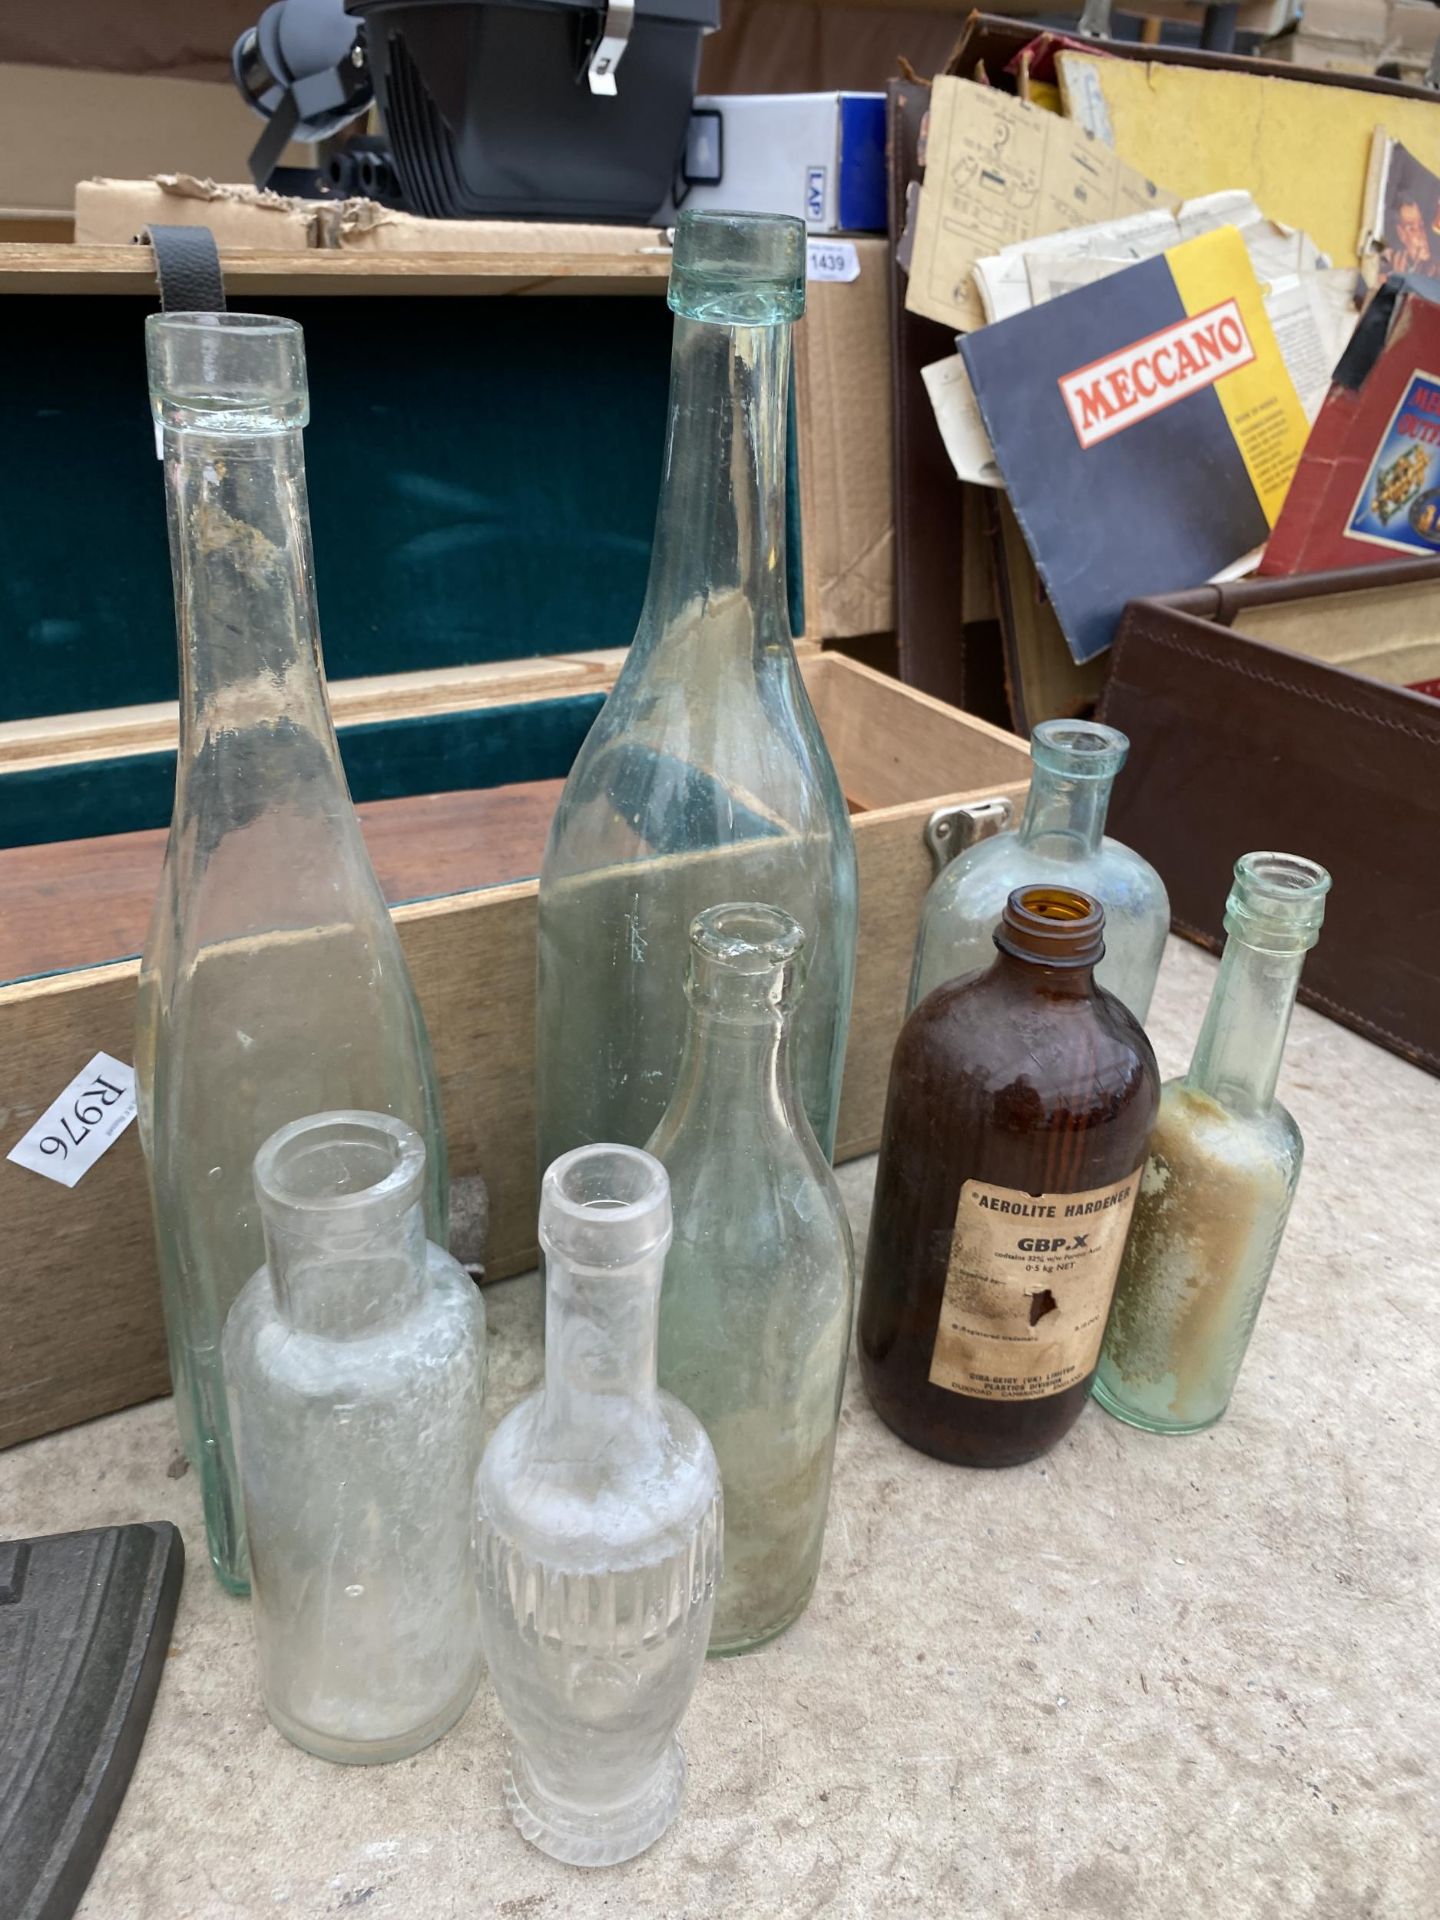 TWO WOODEN STORAGE BOXES, AN ASSORTMENT OF GLASS BOTTLES AND TWO FLAT IRONS - Image 2 of 4